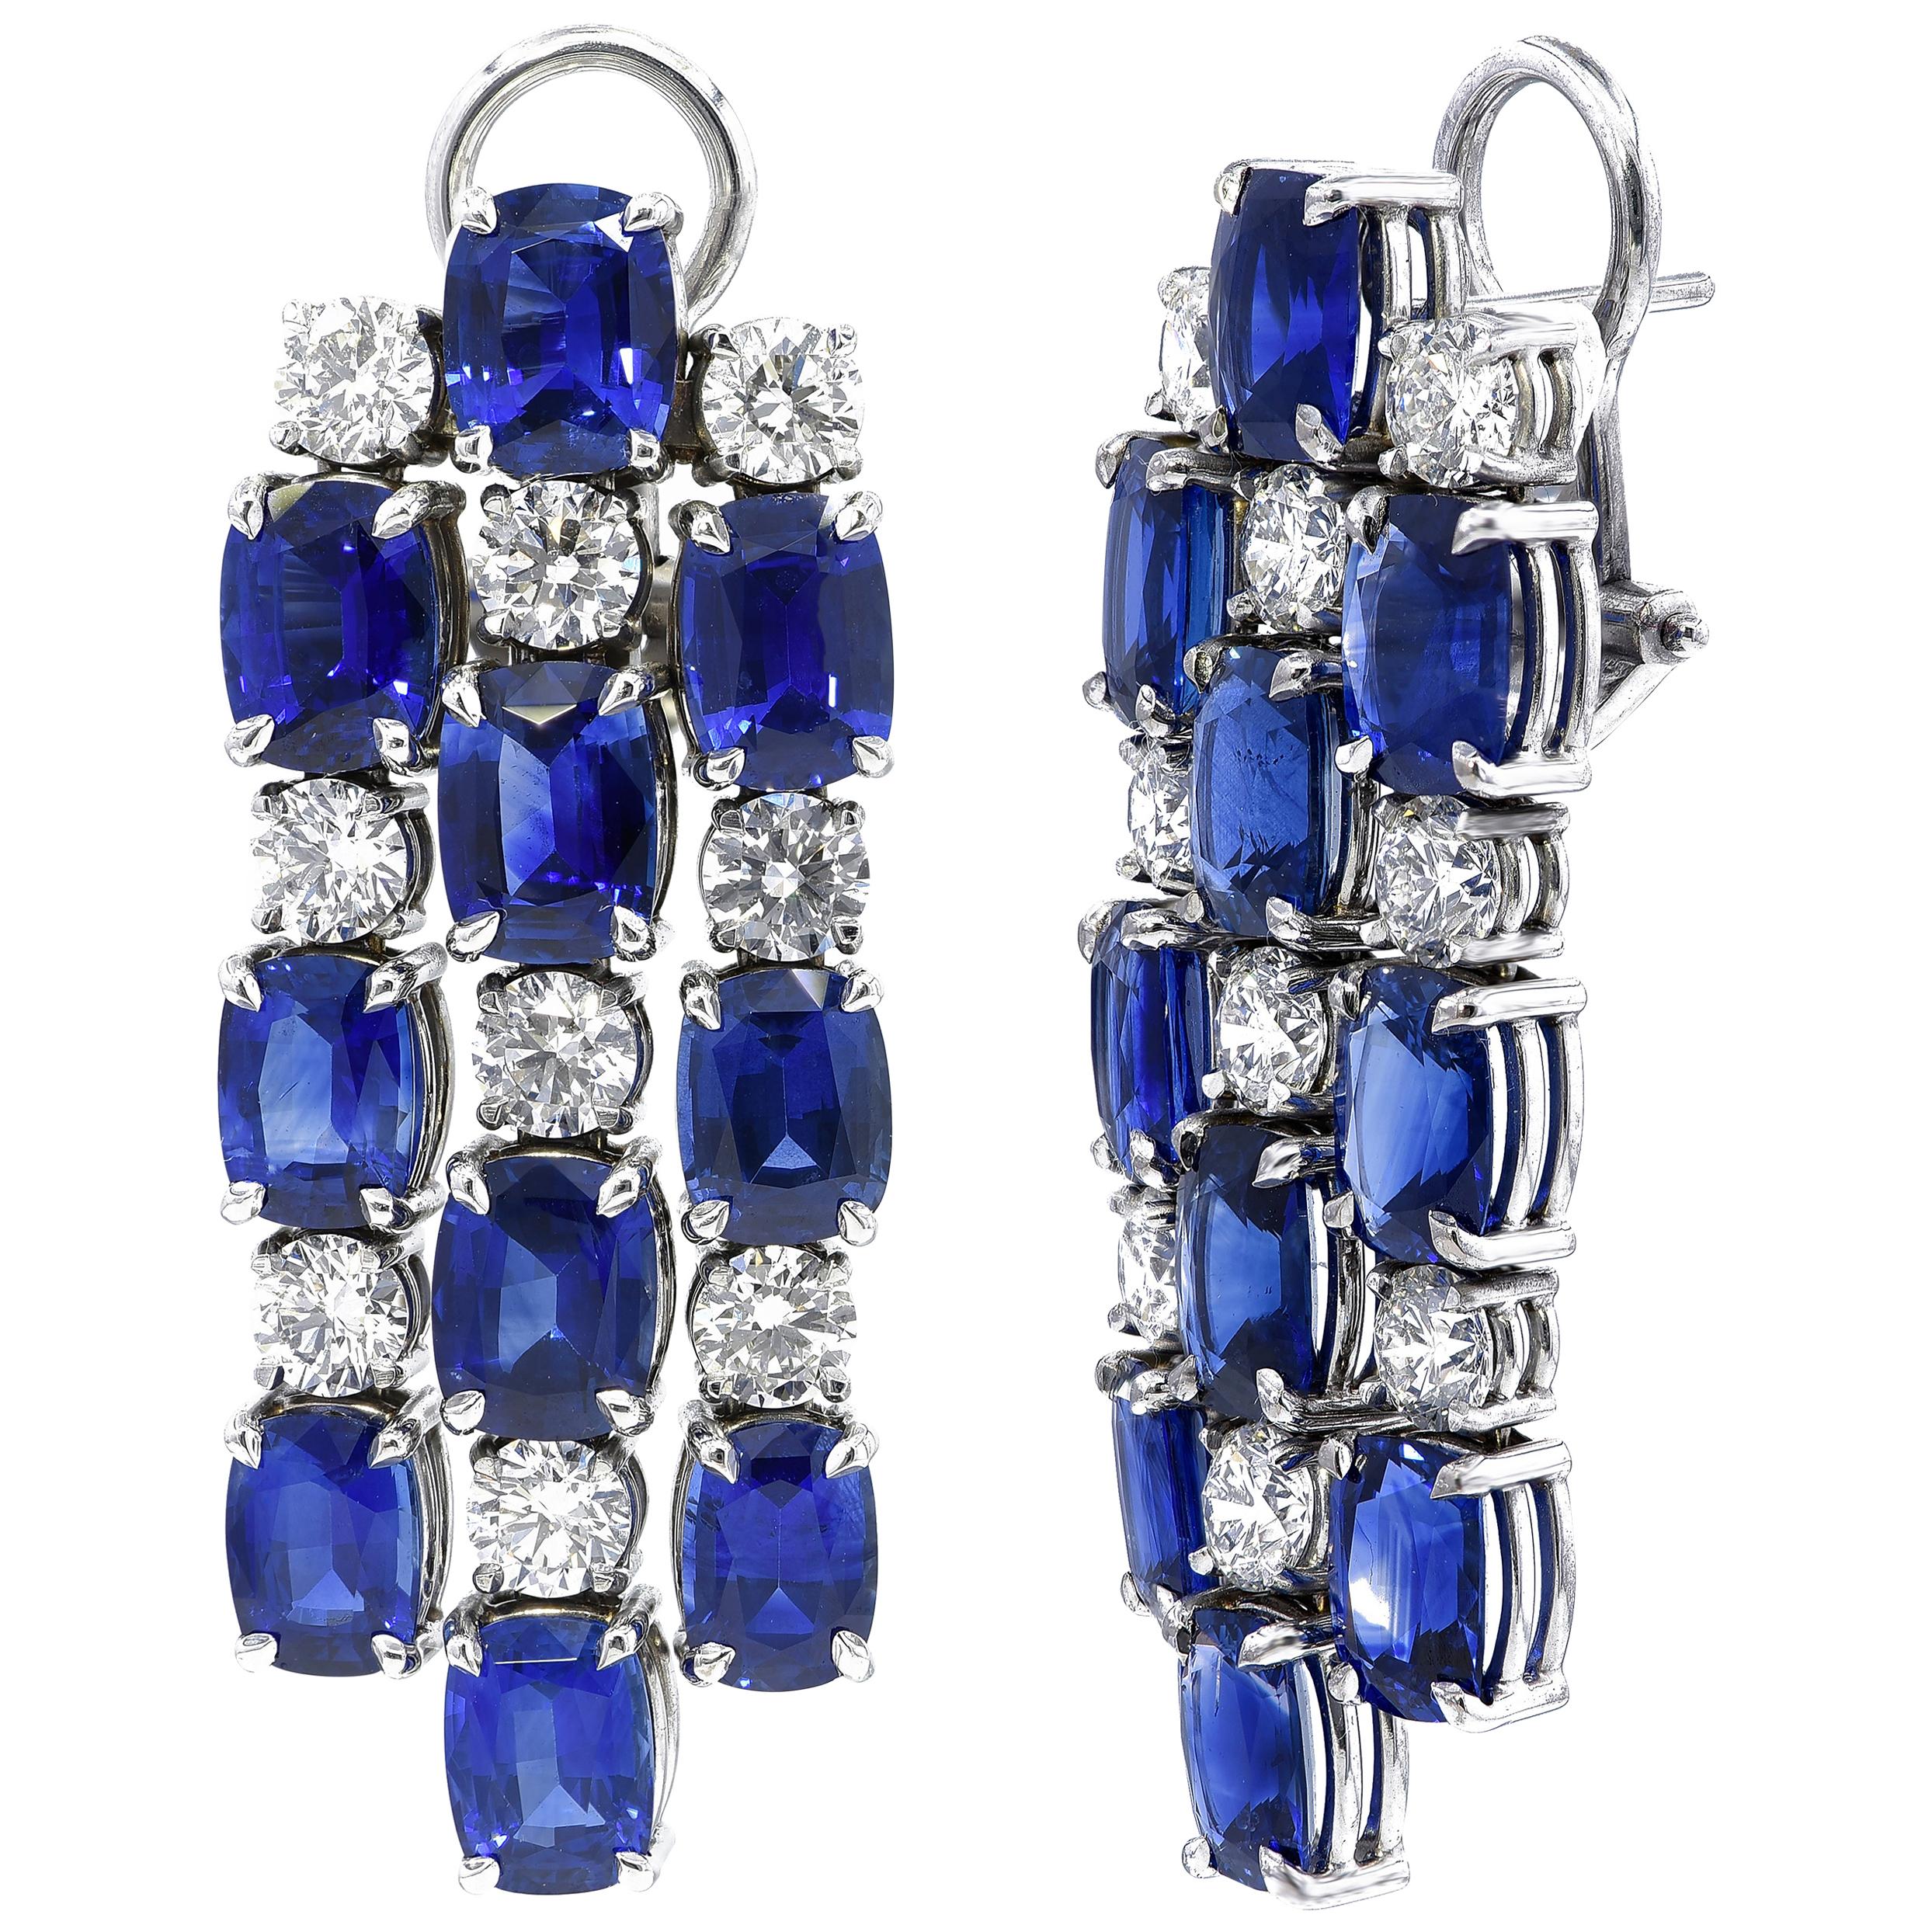 18kt White Gold Earrings with 21.42ct Sapphires, 5.09ct Diamonds, CGL Certified For Sale